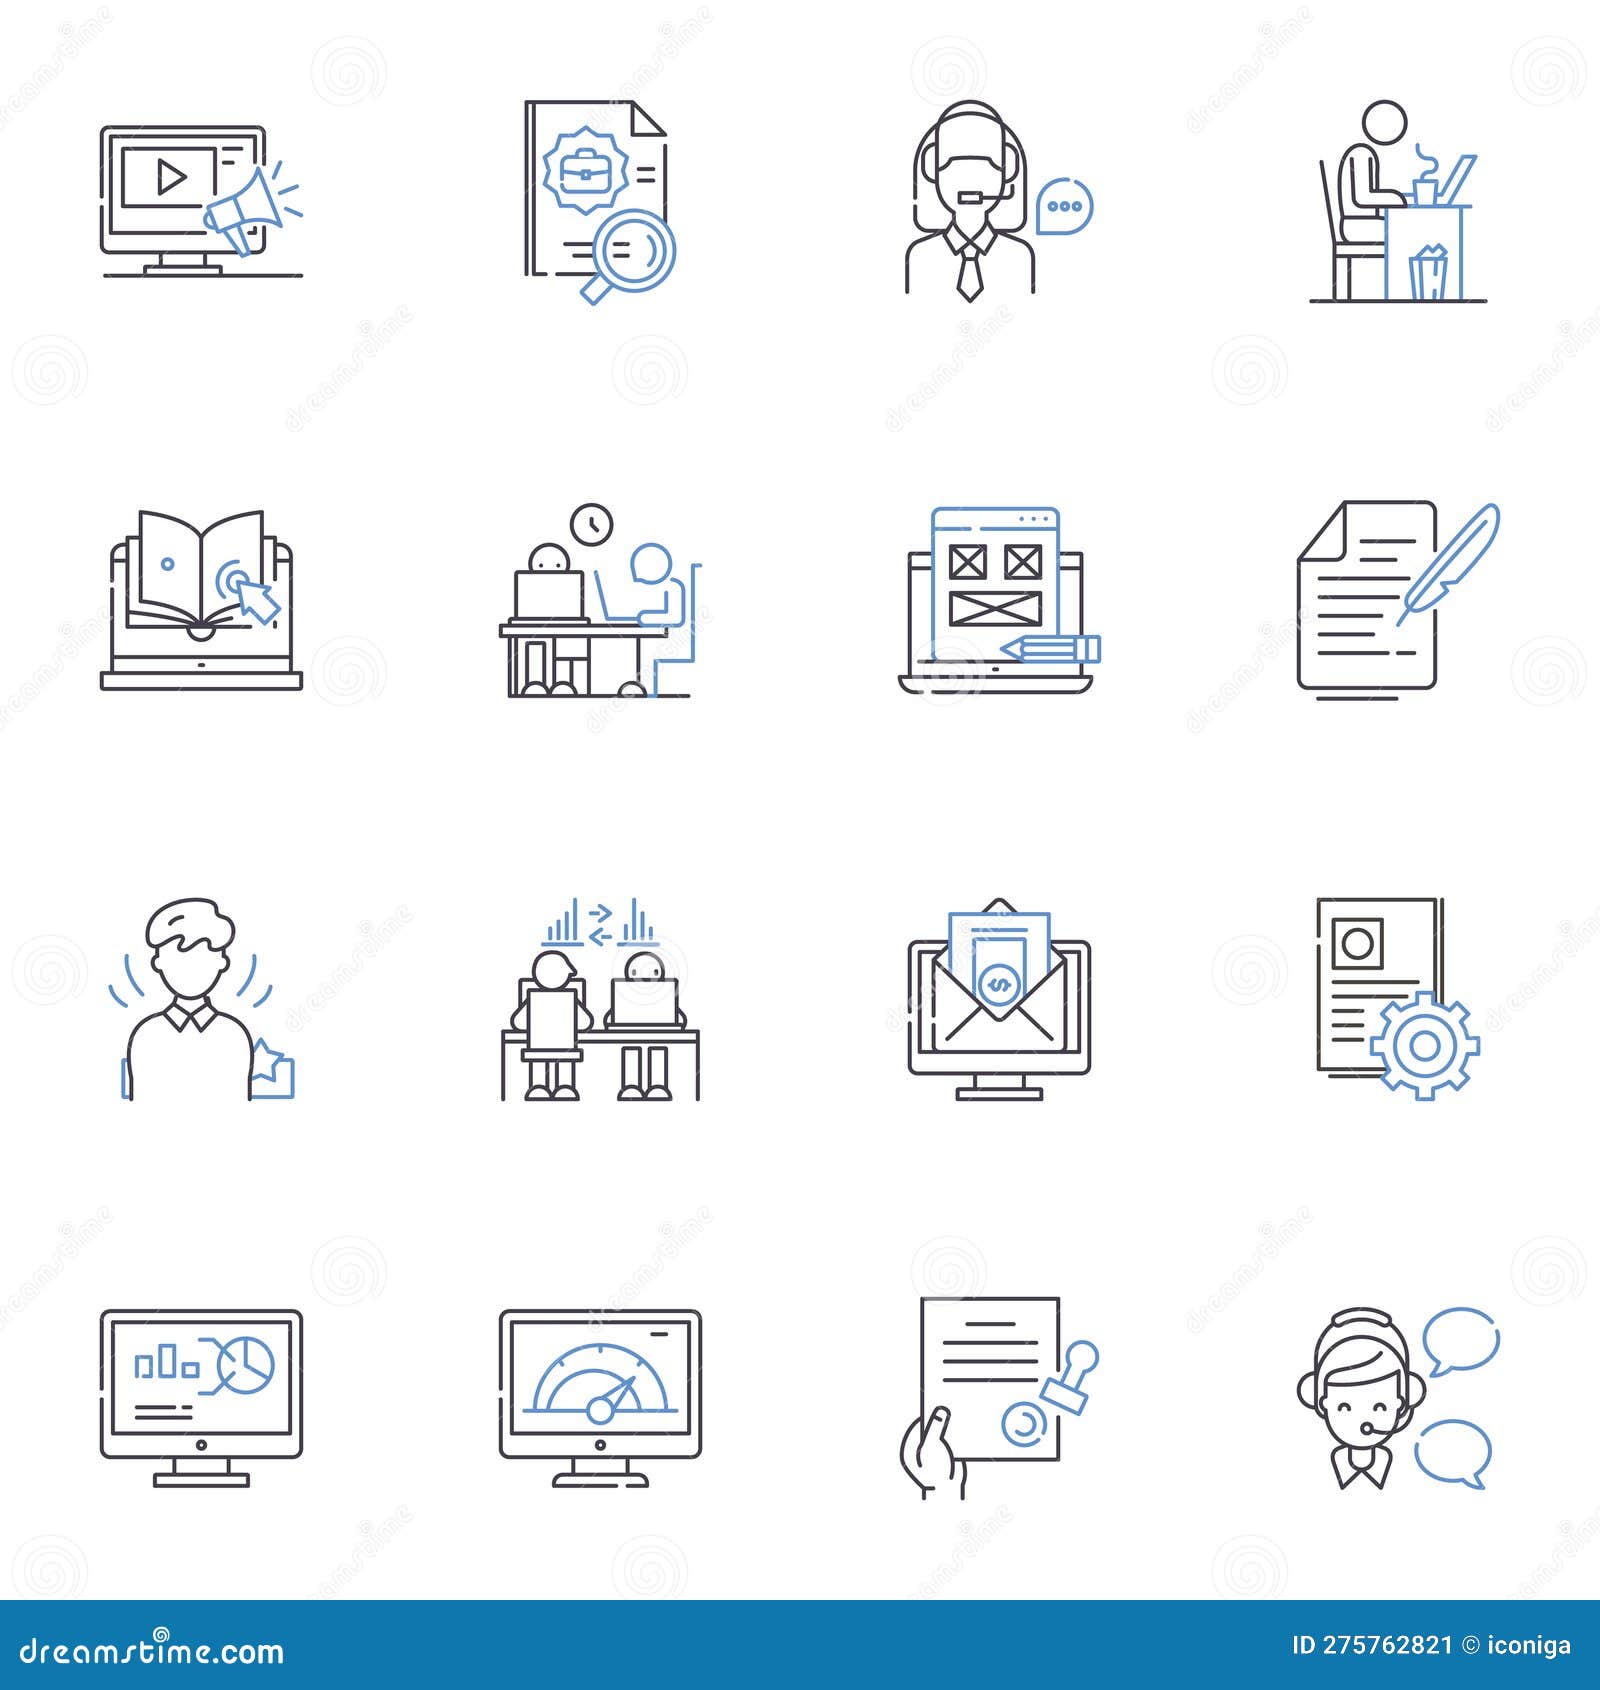 web-based employment line icons collection. remote, gig, freelance, telecommute, work-from-home, virtual, outsourced